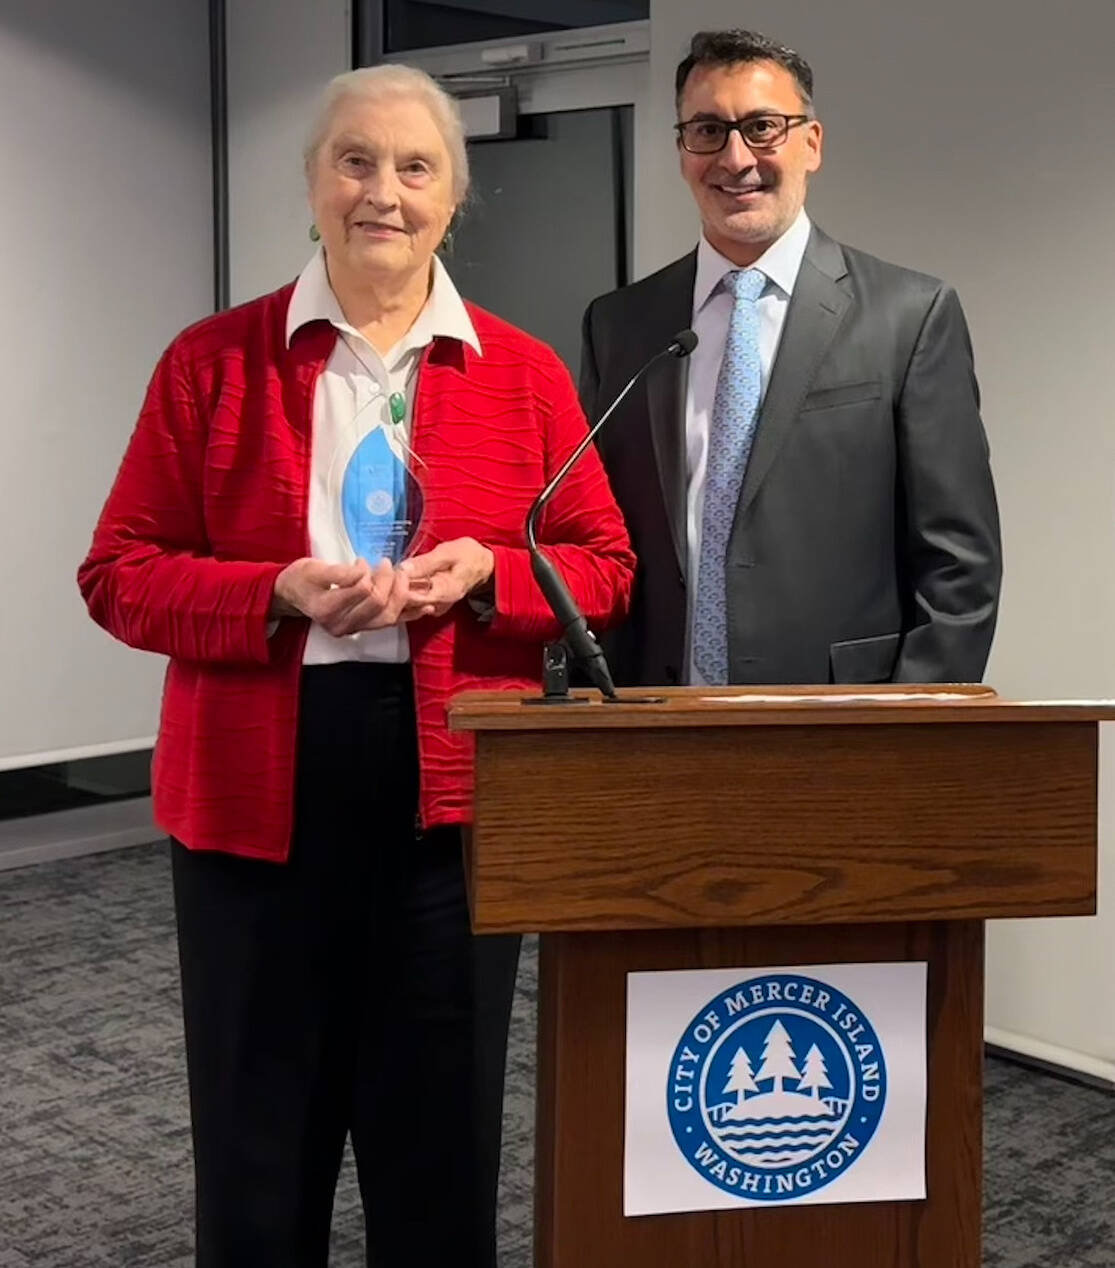 Lola Deane receives her 2022 Community Member of the Year award from Mayor Salim Nice at the Dec. 5 city council meeting. Photo courtesy of the city of Mercer Island